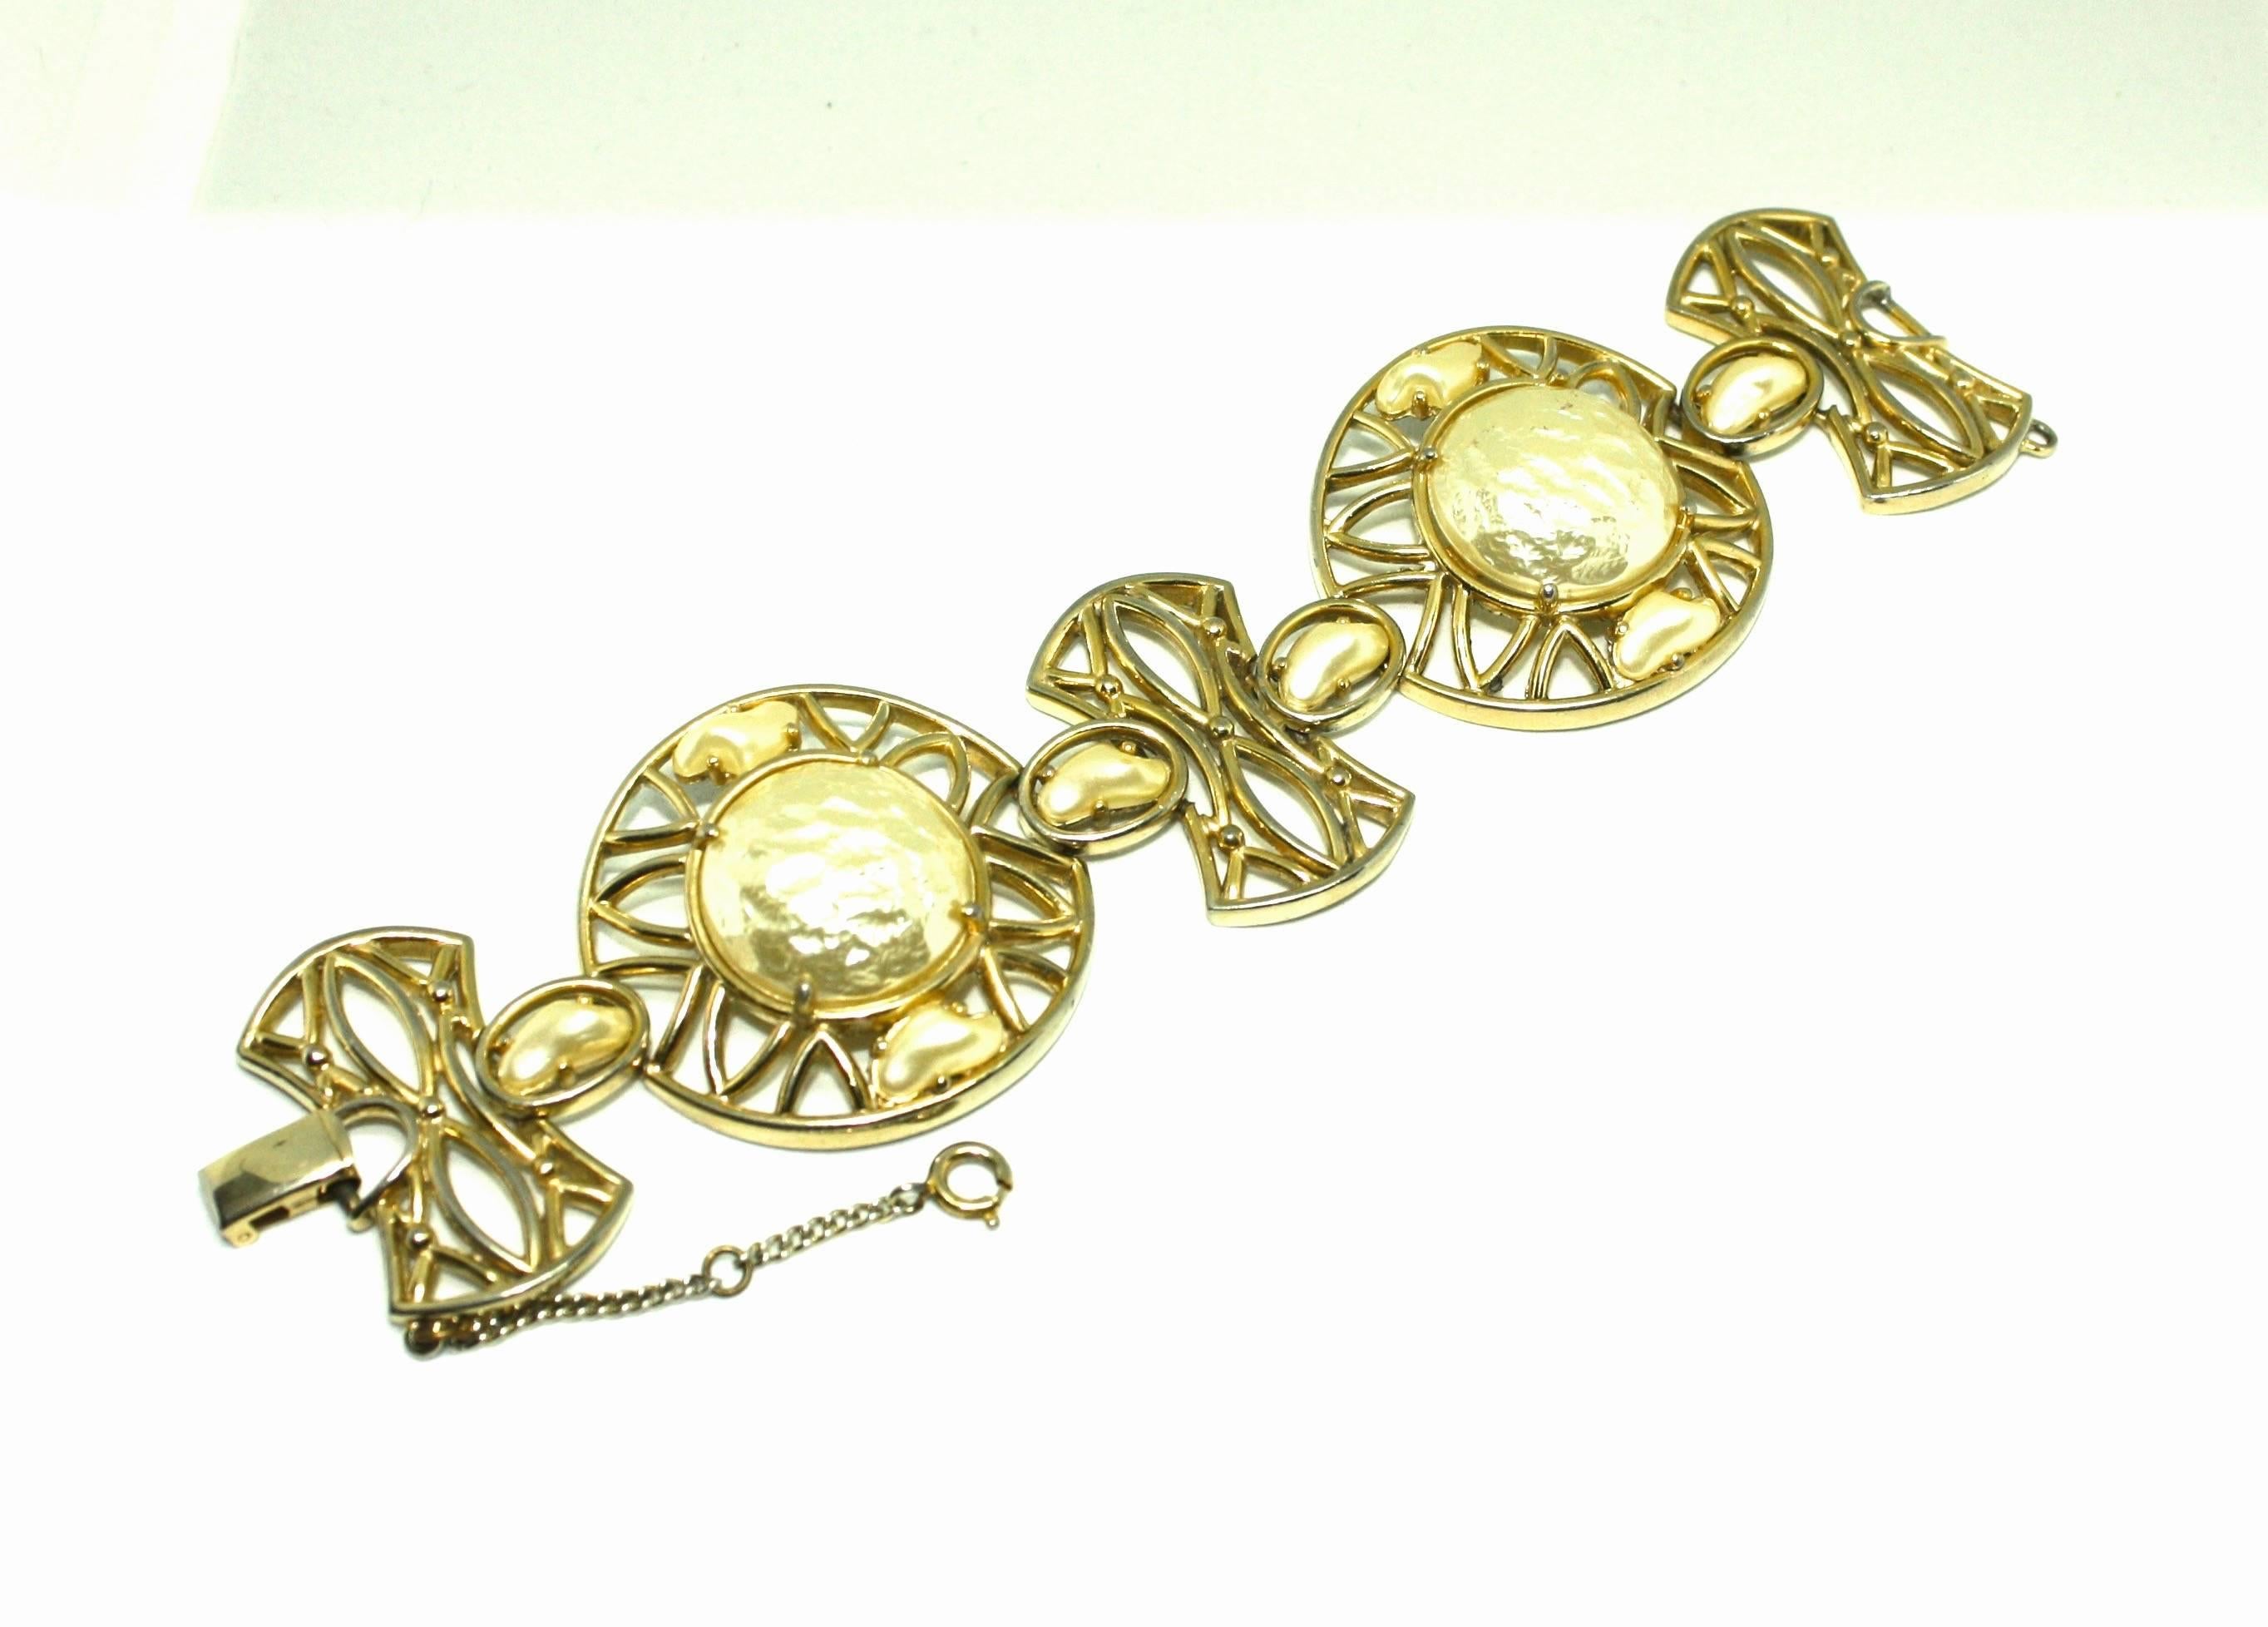 Contemporary Faux Pearl Bracelet and Clip Earrings Suite by Shiapirelli, 1950's For Sale